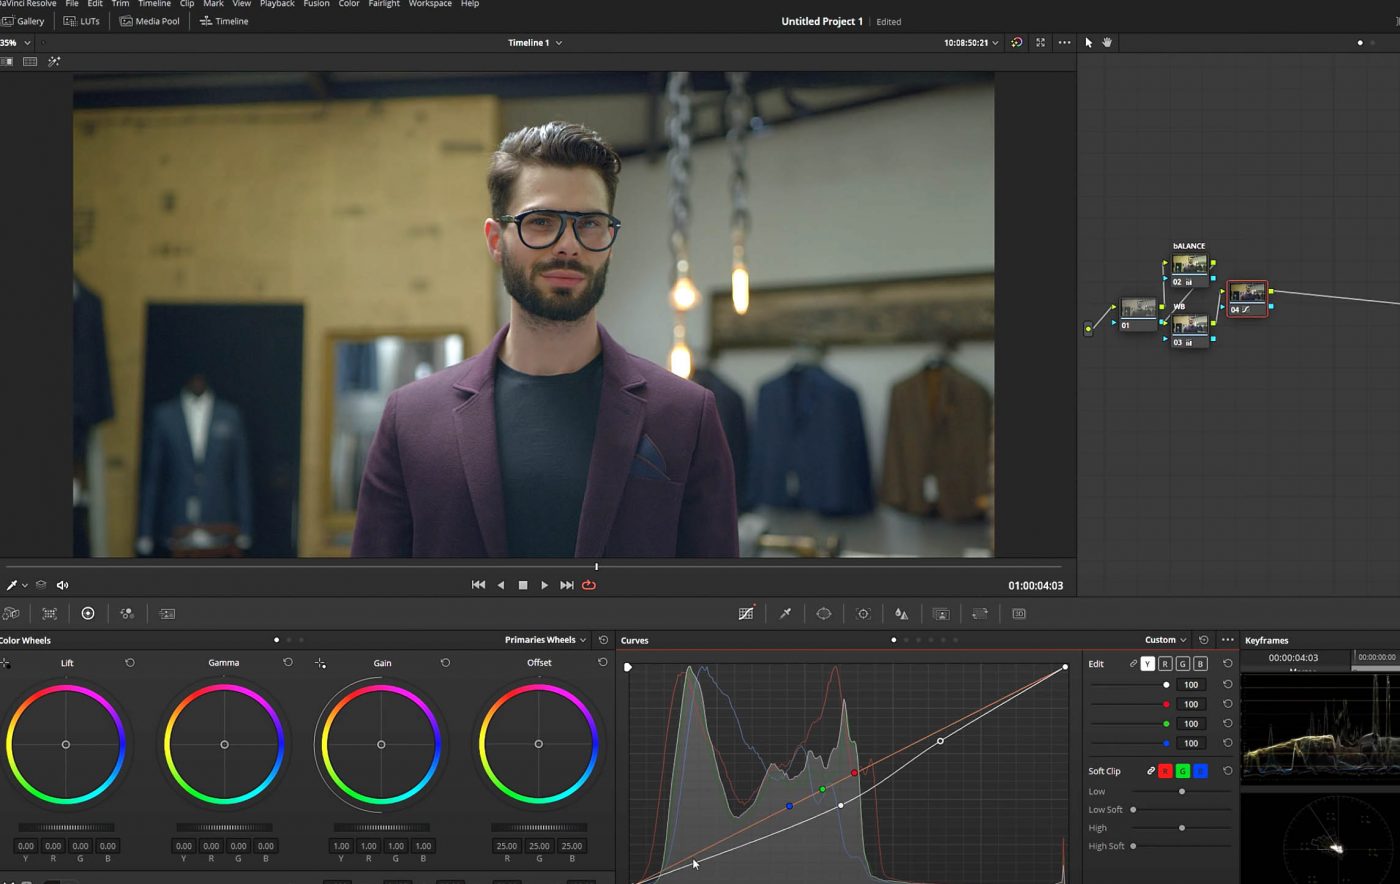 what video formats does davinci resolve support